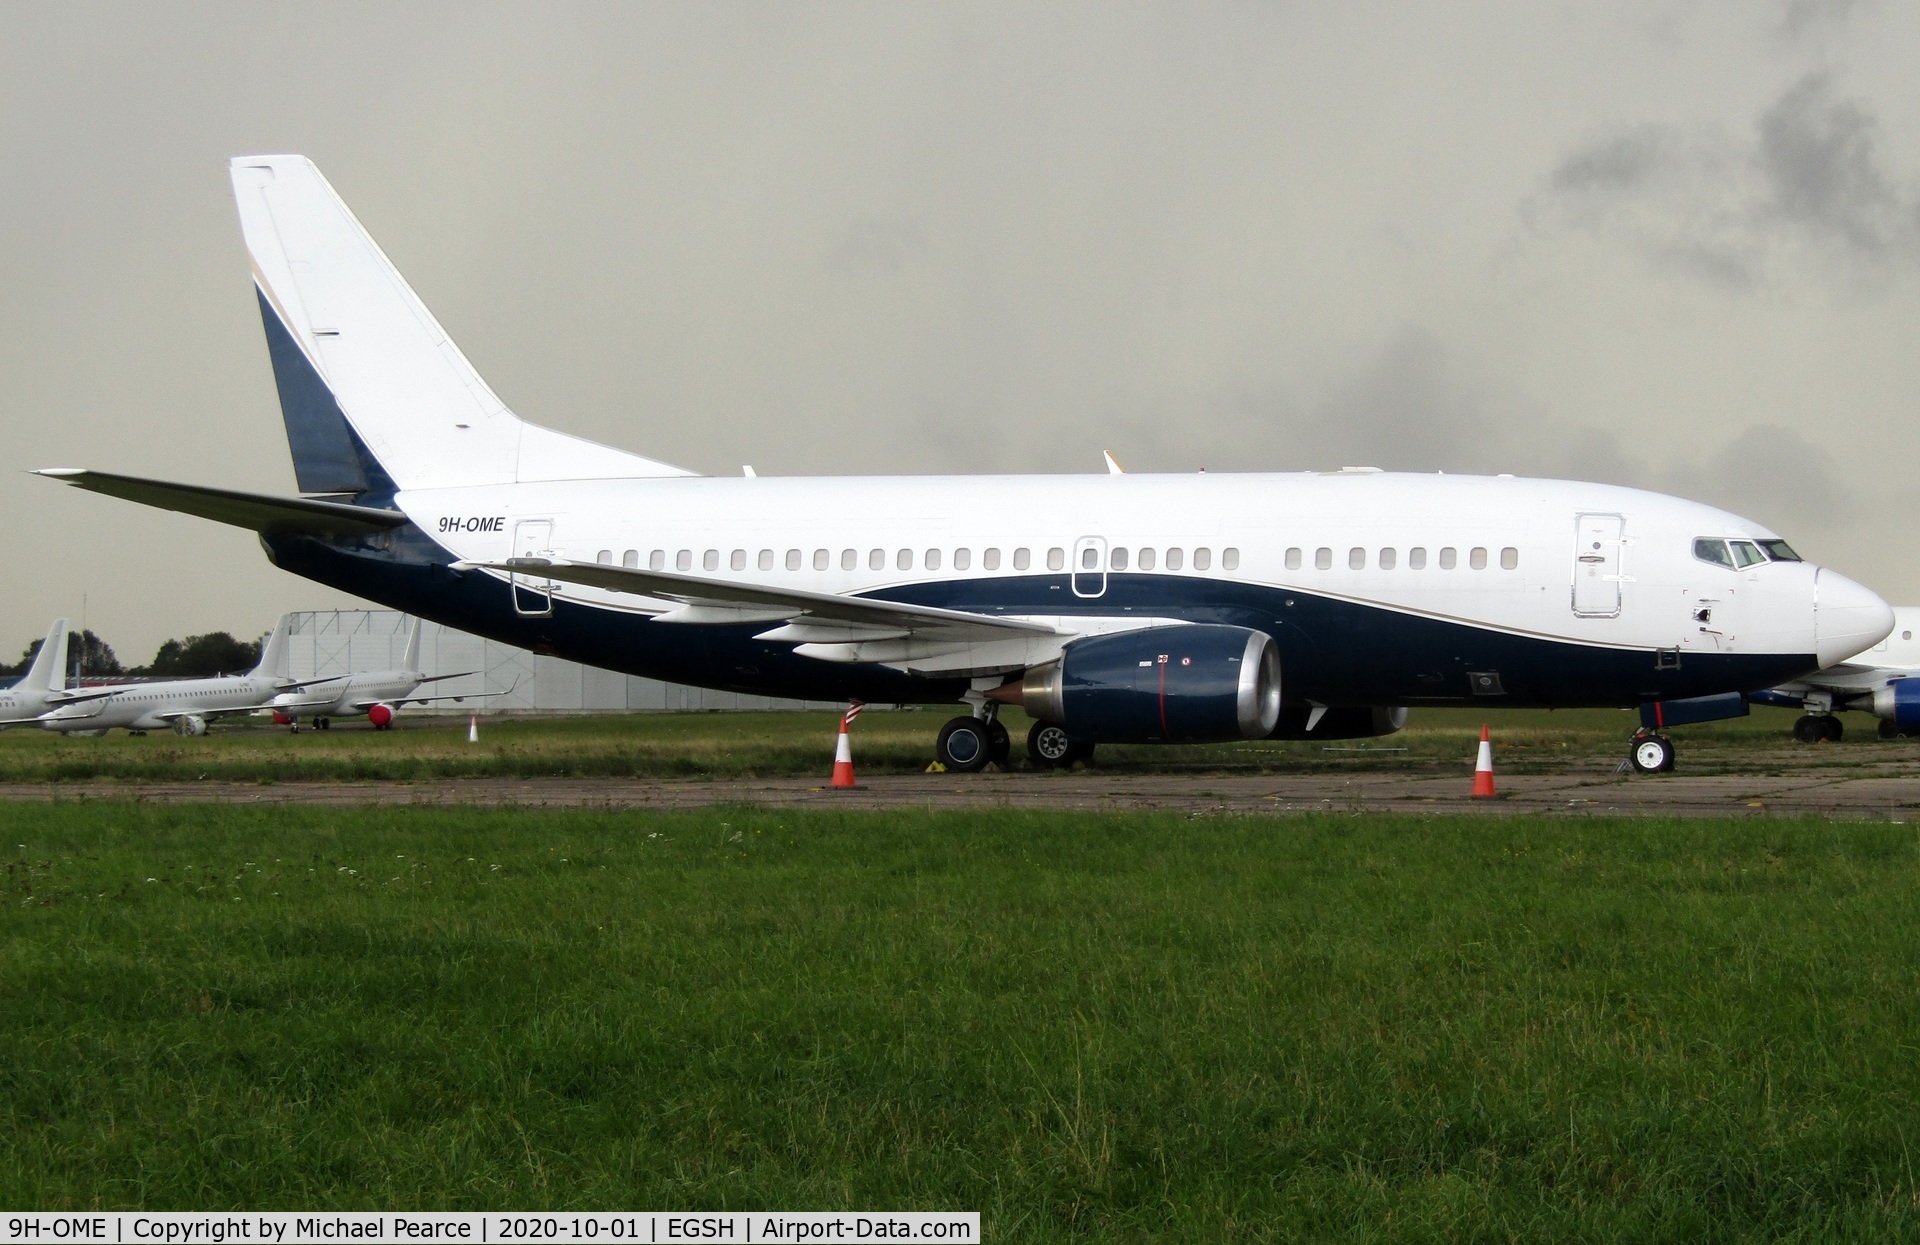 9H-OME, 1991 Boeing 737-505 C/N 24274, Stored North Side due to COVID-19, arrived 17th April 2020.